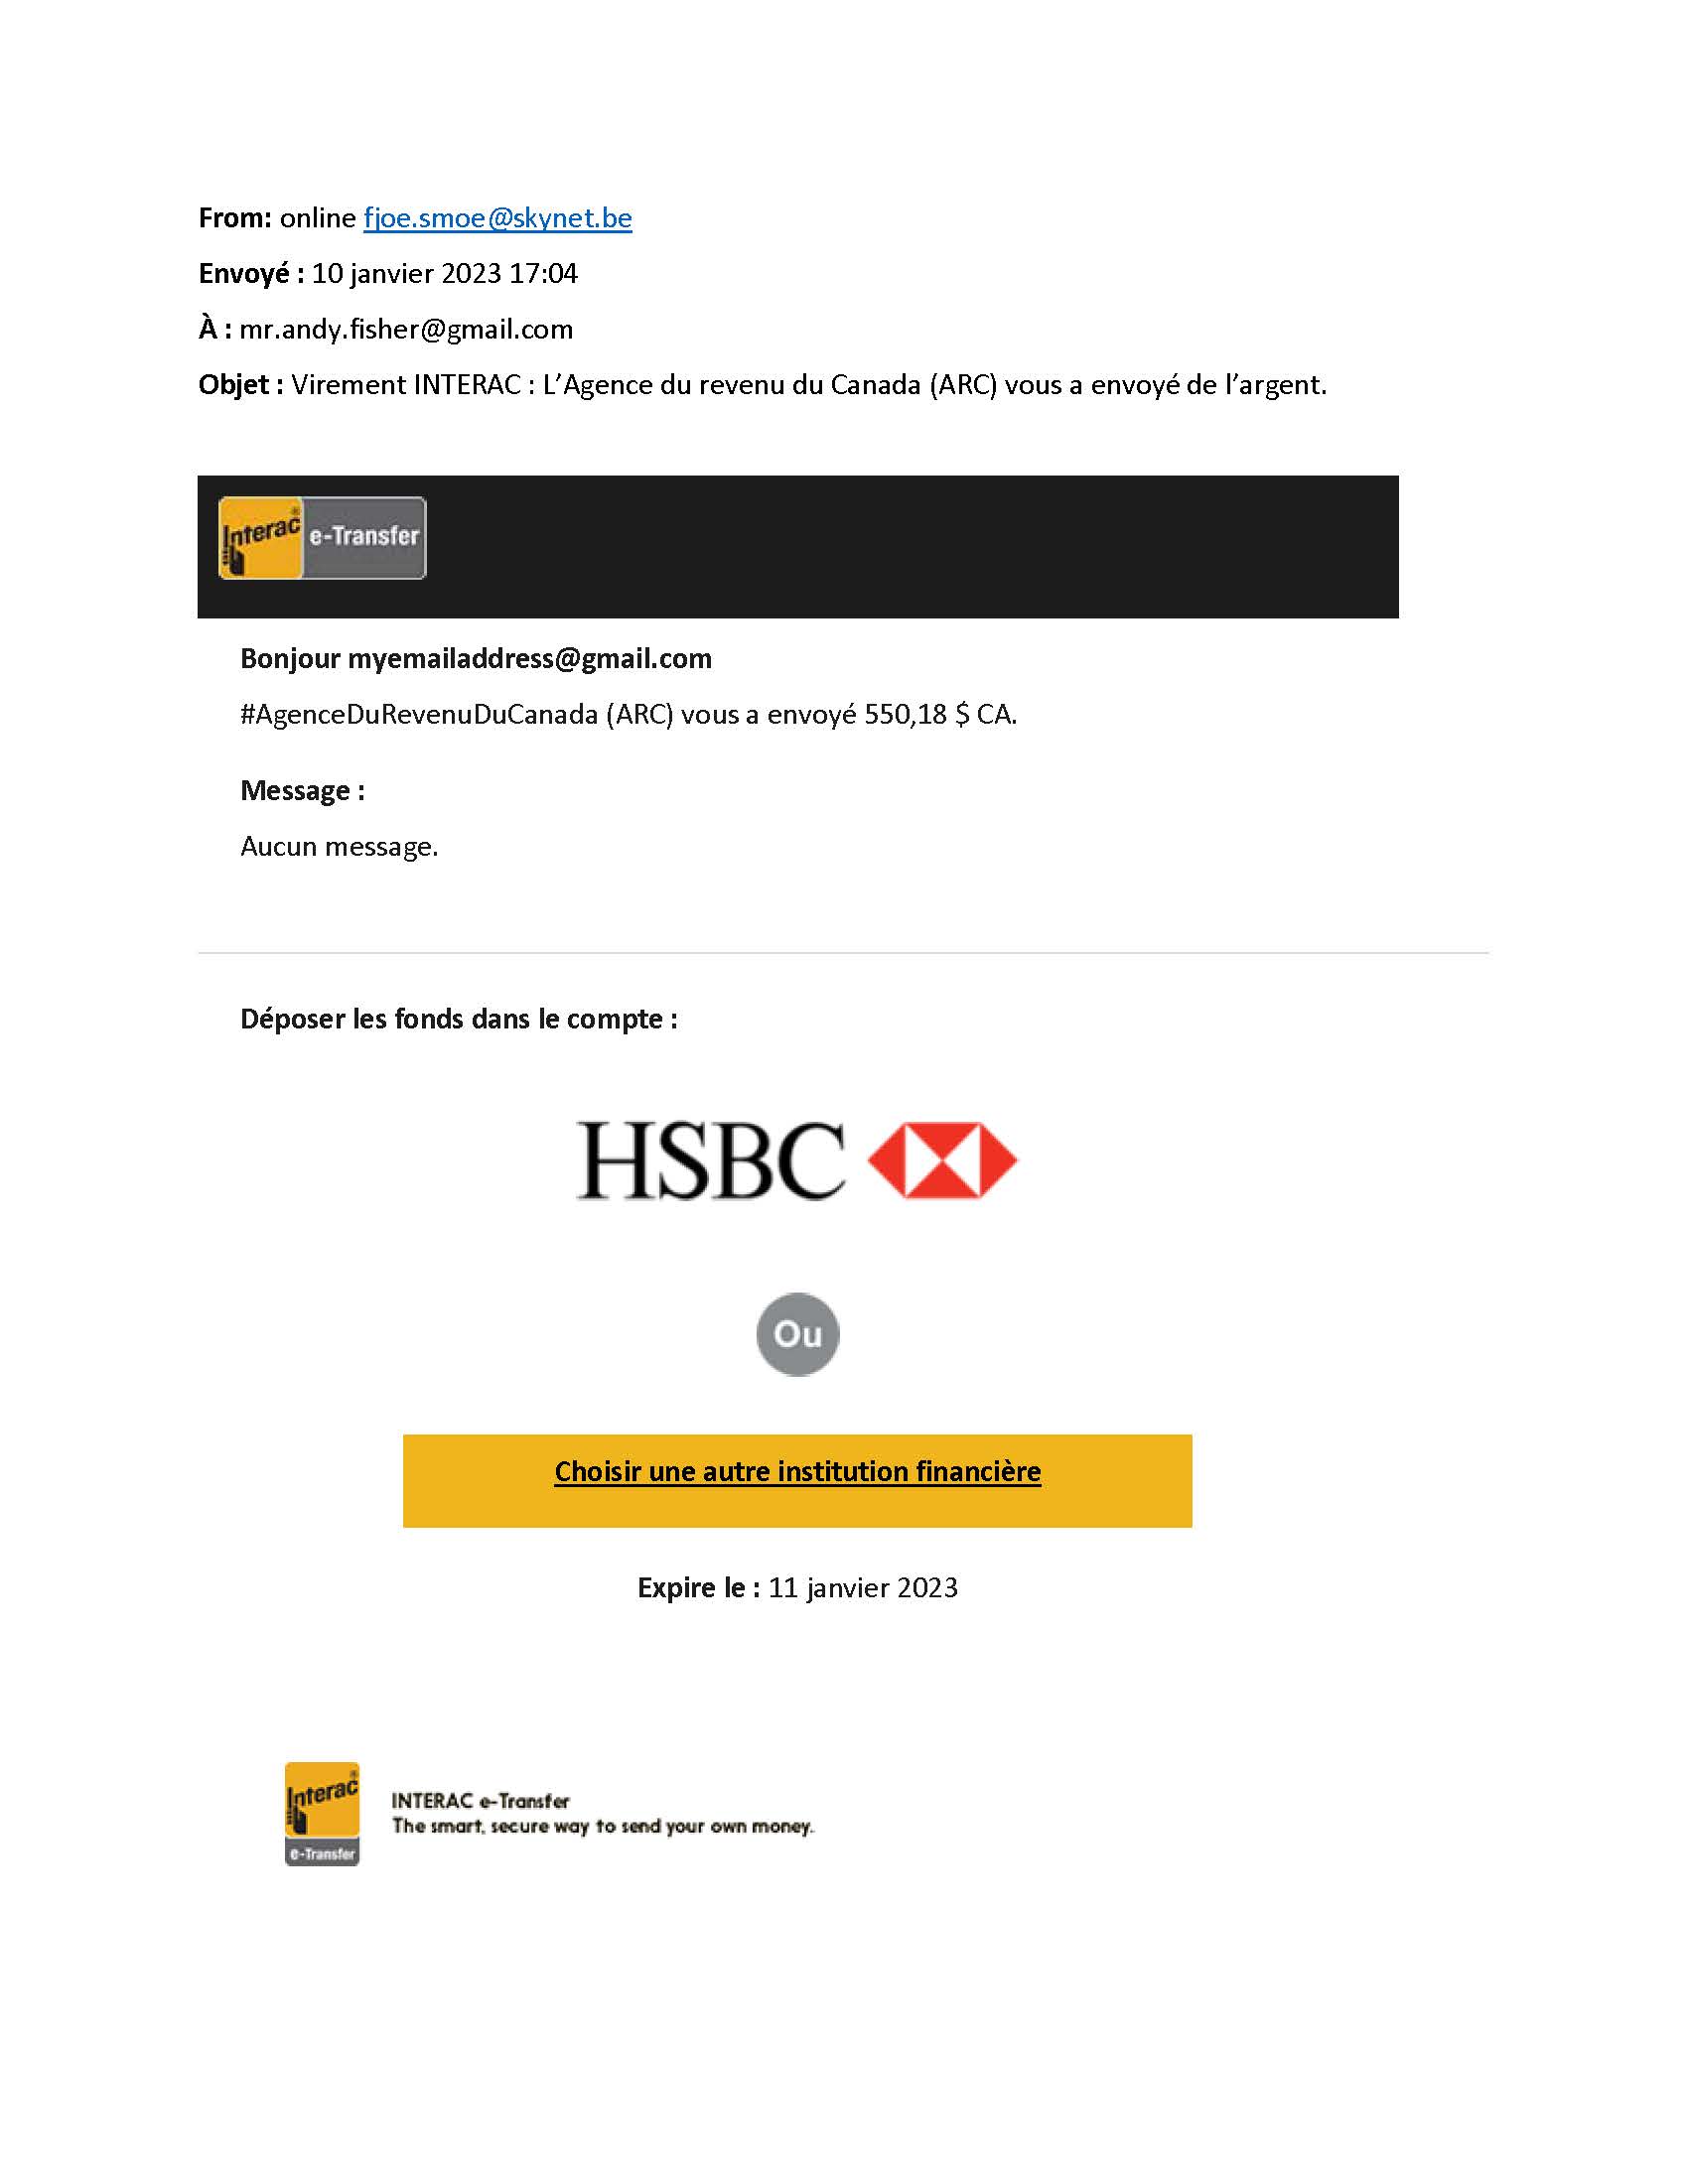 additional-forms-and-documents/Fraud_Email_FR.jpg